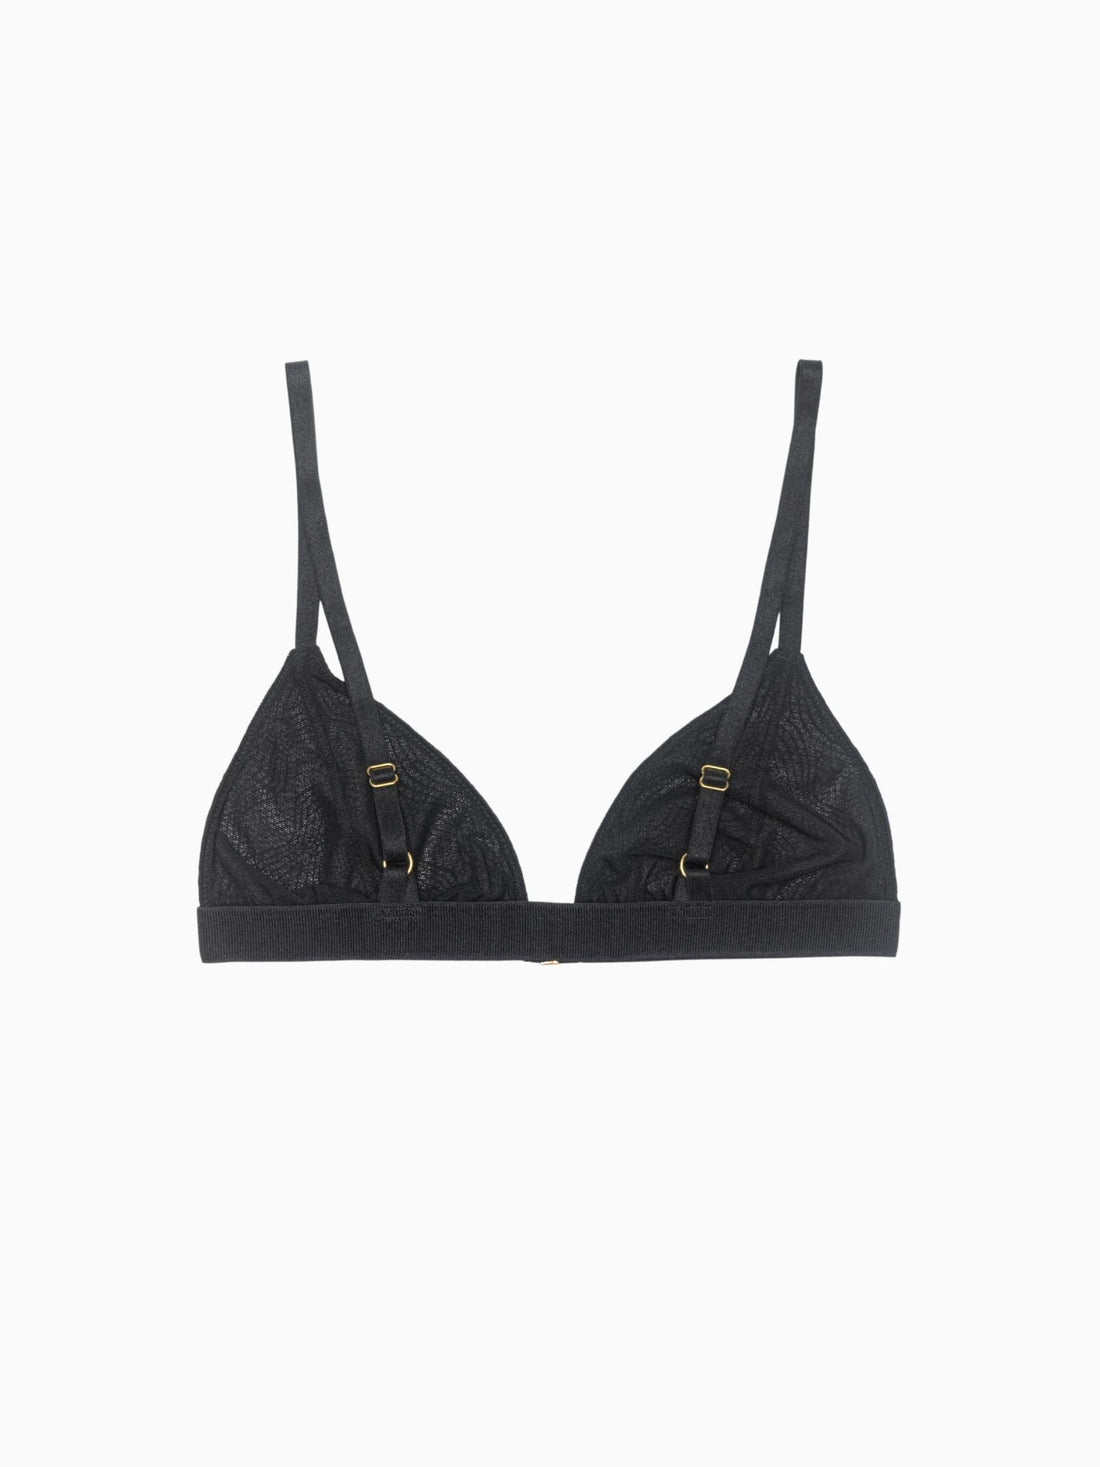 Semi/Romantic -  I have large breasts, is a triangle bra for me? We get  this question often. The short answer is : YES. Take our esme bra for  example- With a